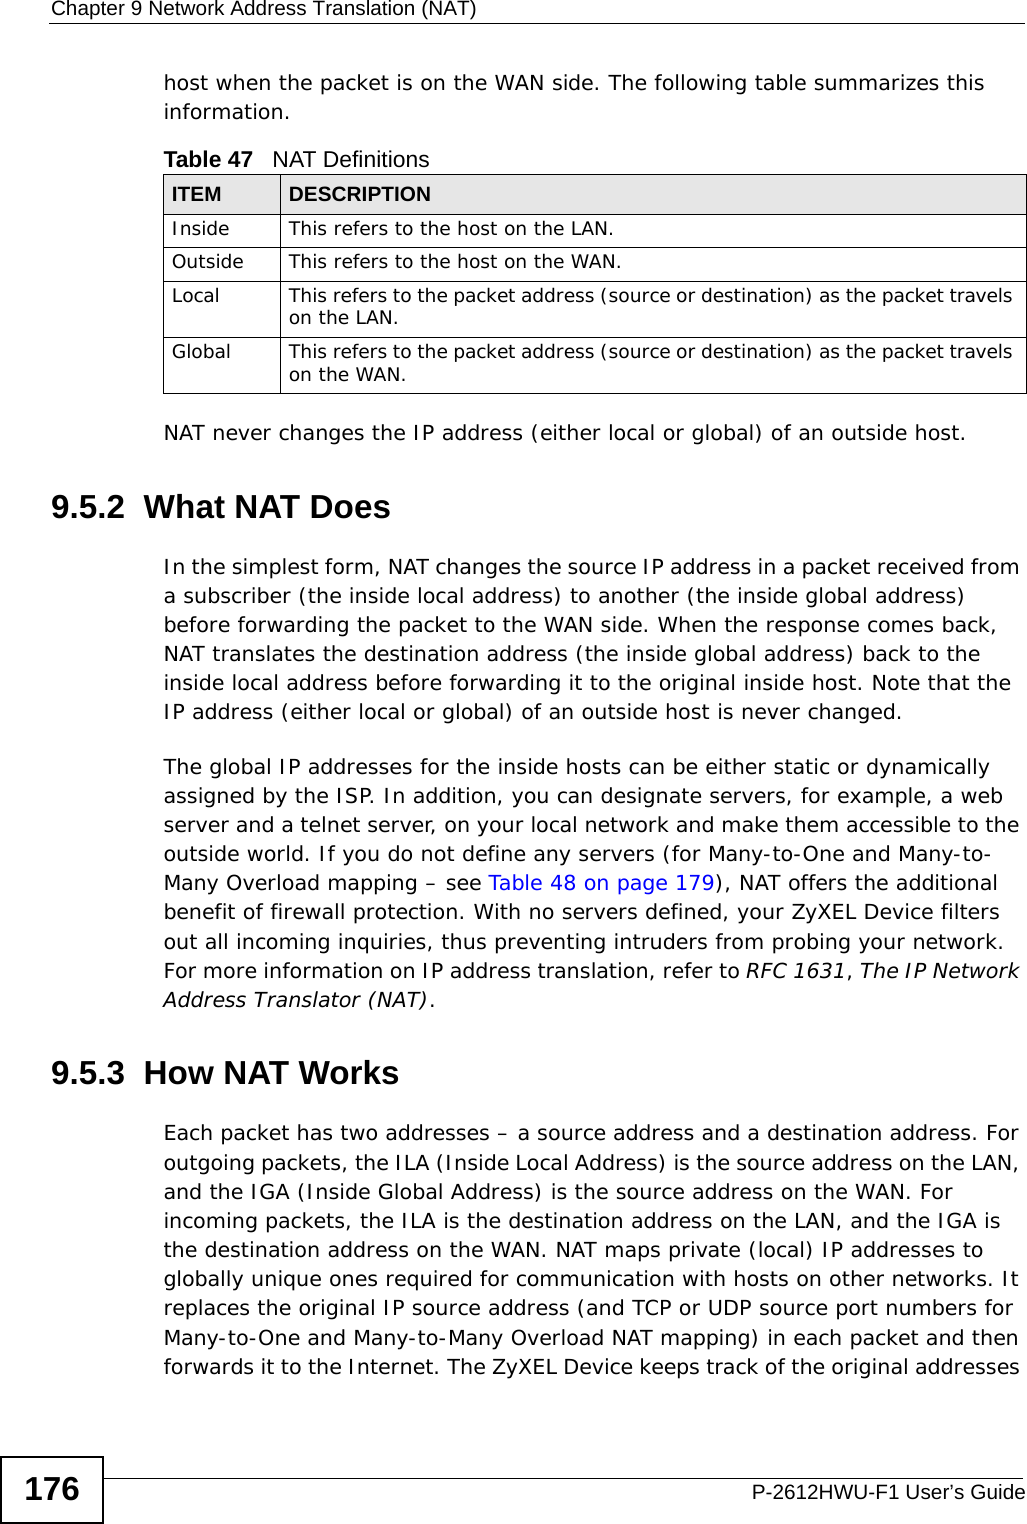 Chapter 9 Network Address Translation (NAT)P-2612HWU-F1 User’s Guide176host when the packet is on the WAN side. The following table summarizes this information.NAT never changes the IP address (either local or global) of an outside host.9.5.2  What NAT DoesIn the simplest form, NAT changes the source IP address in a packet received from a subscriber (the inside local address) to another (the inside global address) before forwarding the packet to the WAN side. When the response comes back, NAT translates the destination address (the inside global address) back to the inside local address before forwarding it to the original inside host. Note that the IP address (either local or global) of an outside host is never changed.The global IP addresses for the inside hosts can be either static or dynamically assigned by the ISP. In addition, you can designate servers, for example, a web server and a telnet server, on your local network and make them accessible to the outside world. If you do not define any servers (for Many-to-One and Many-to-Many Overload mapping – see Table 48 on page 179), NAT offers the additional benefit of firewall protection. With no servers defined, your ZyXEL Device filters out all incoming inquiries, thus preventing intruders from probing your network. For more information on IP address translation, refer to RFC 1631, The IP Network Address Translator (NAT).9.5.3  How NAT WorksEach packet has two addresses – a source address and a destination address. For outgoing packets, the ILA (Inside Local Address) is the source address on the LAN, and the IGA (Inside Global Address) is the source address on the WAN. For incoming packets, the ILA is the destination address on the LAN, and the IGA is the destination address on the WAN. NAT maps private (local) IP addresses to globally unique ones required for communication with hosts on other networks. It replaces the original IP source address (and TCP or UDP source port numbers for Many-to-One and Many-to-Many Overload NAT mapping) in each packet and then forwards it to the Internet. The ZyXEL Device keeps track of the original addresses Table 47   NAT DefinitionsITEM DESCRIPTIONInside This refers to the host on the LAN.Outside This refers to the host on the WAN.Local This refers to the packet address (source or destination) as the packet travels on the LAN.Global This refers to the packet address (source or destination) as the packet travels on the WAN.